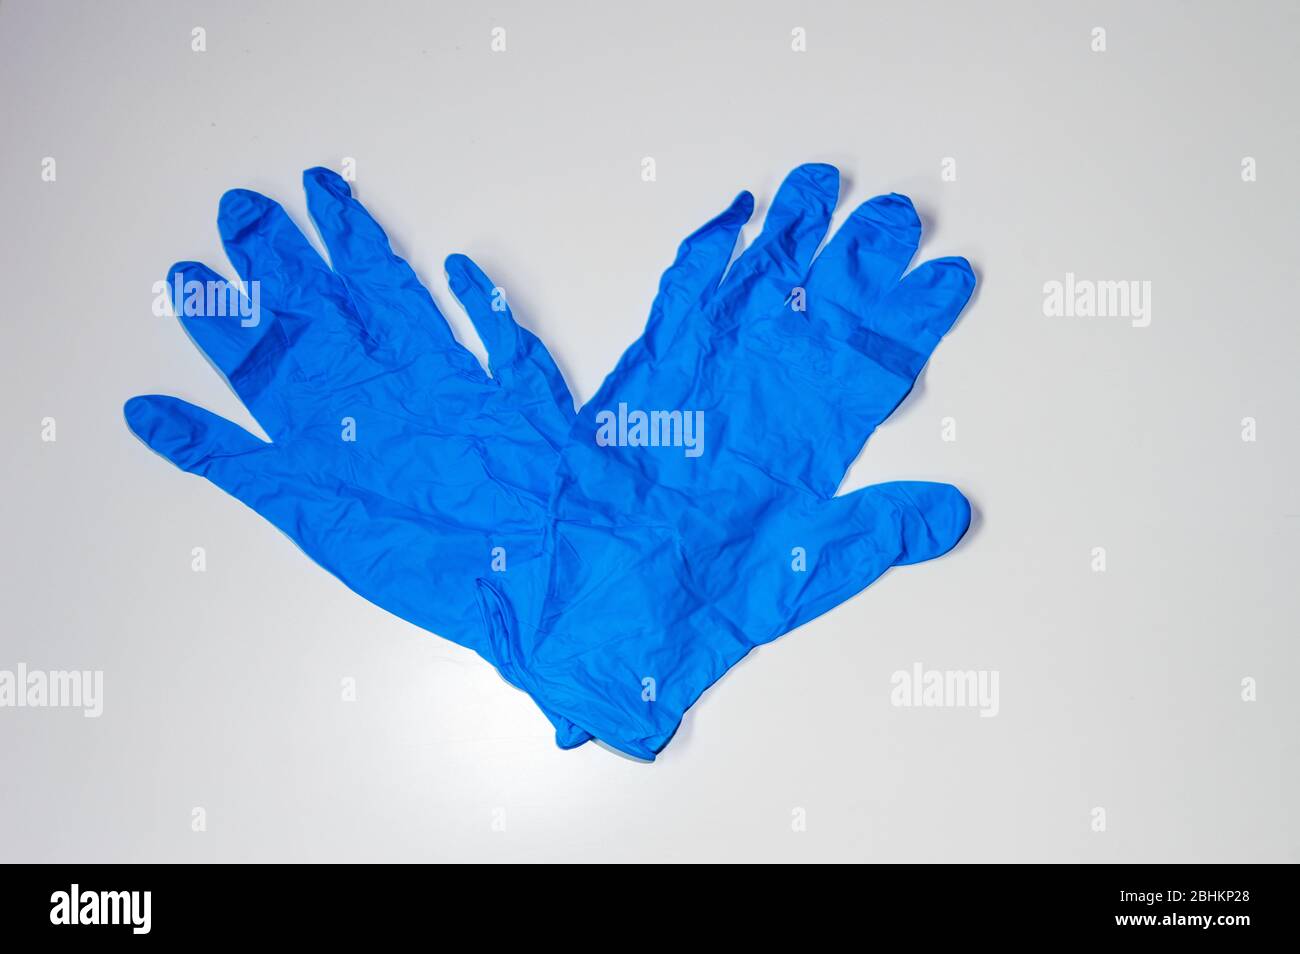 Blue Gloves Used As Individual Protective Equipment To Not Get Covid-19. Also Known As Coronavirus. Stock Photo